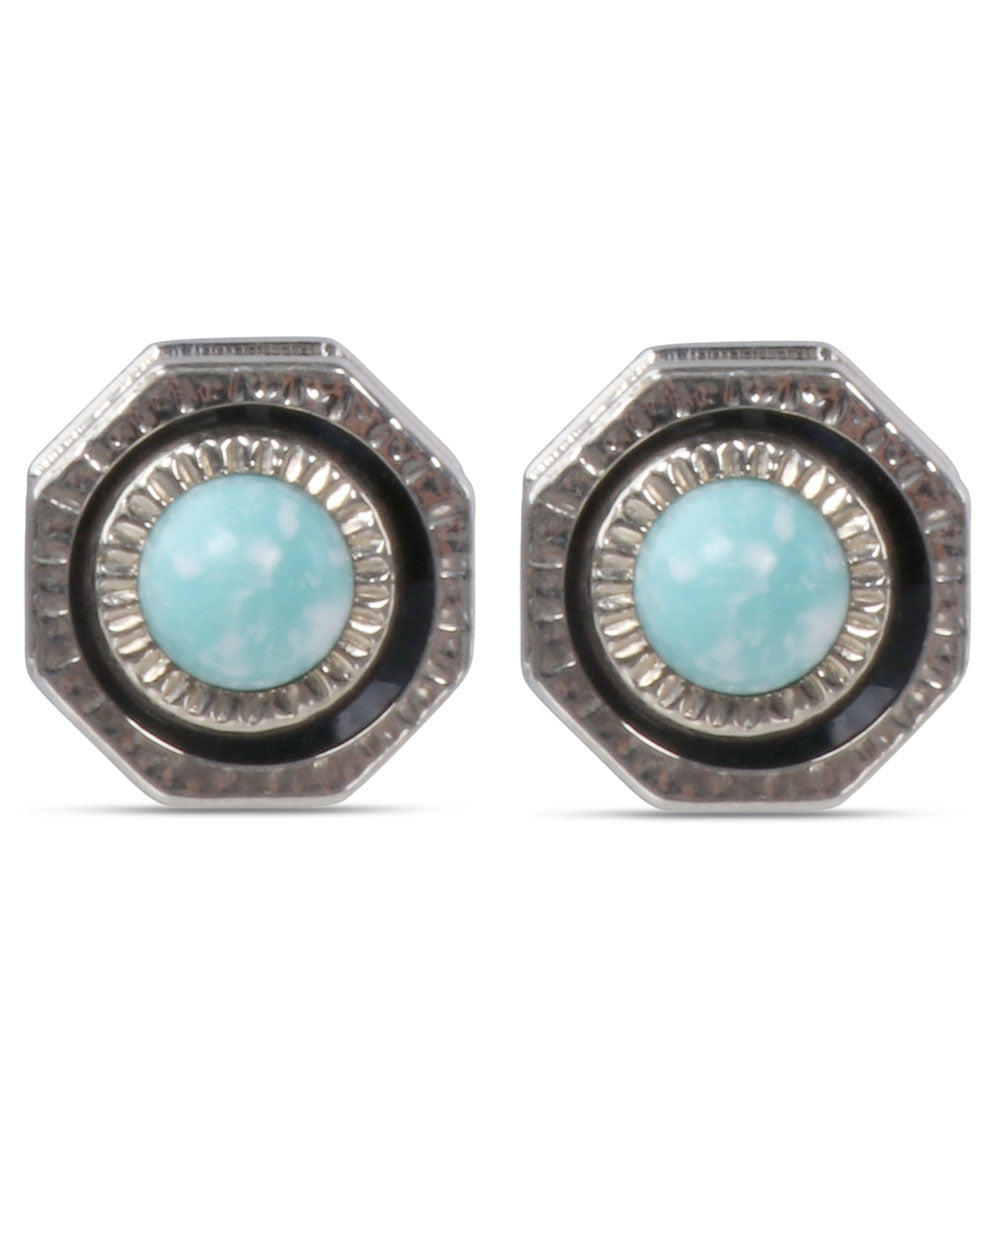 Antique Round Pearl and Turquoise Cufflinks